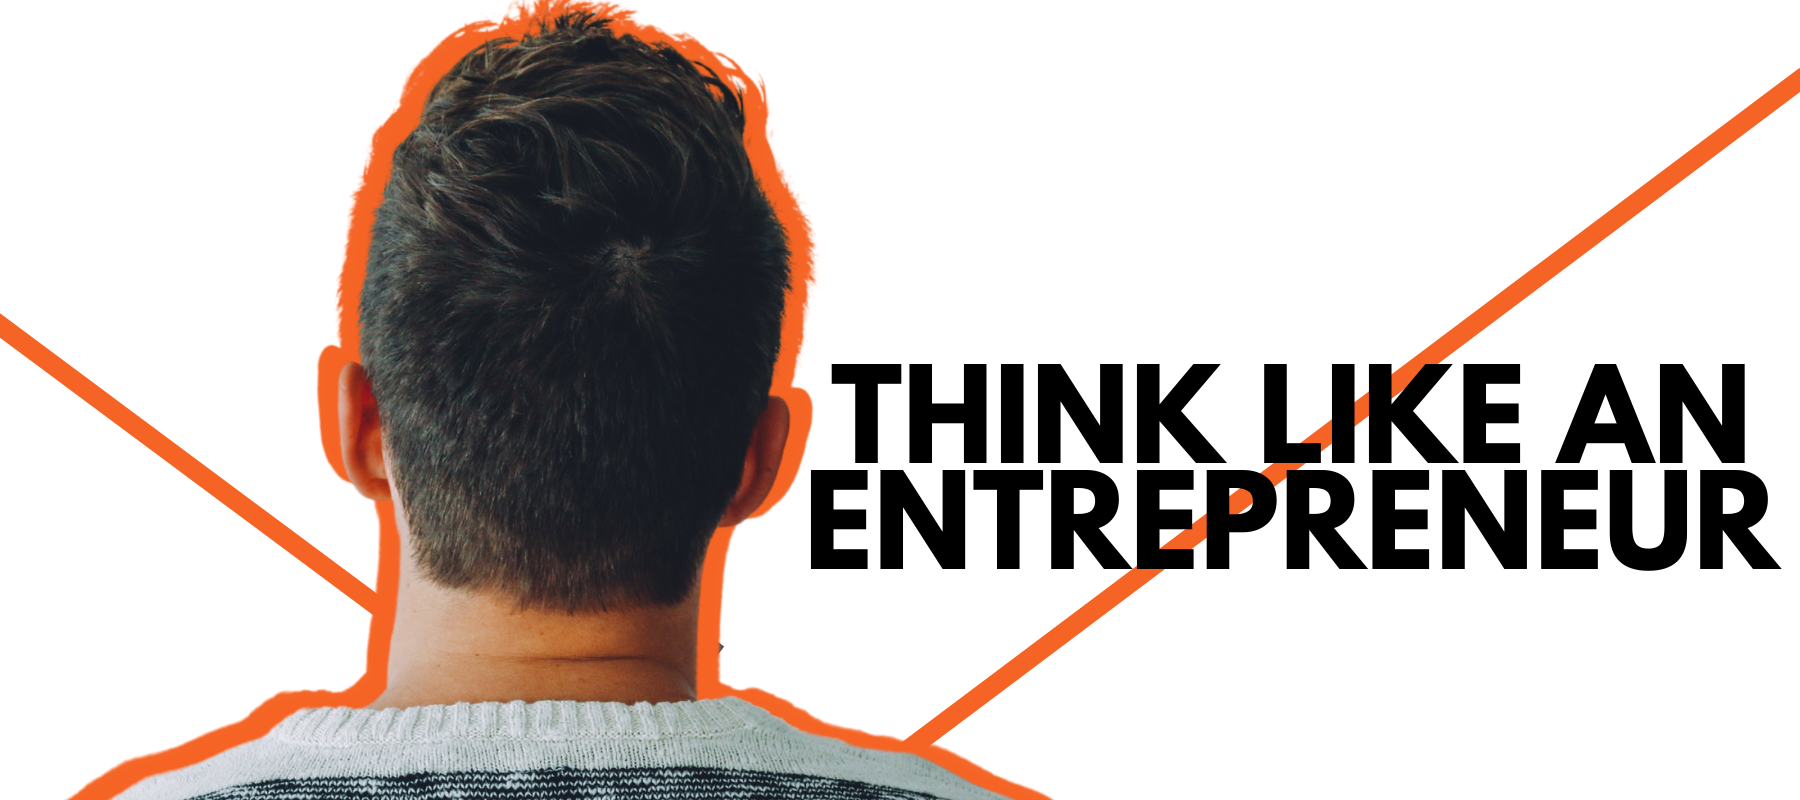 What The Entrepreneurial Mindset Means in 2021